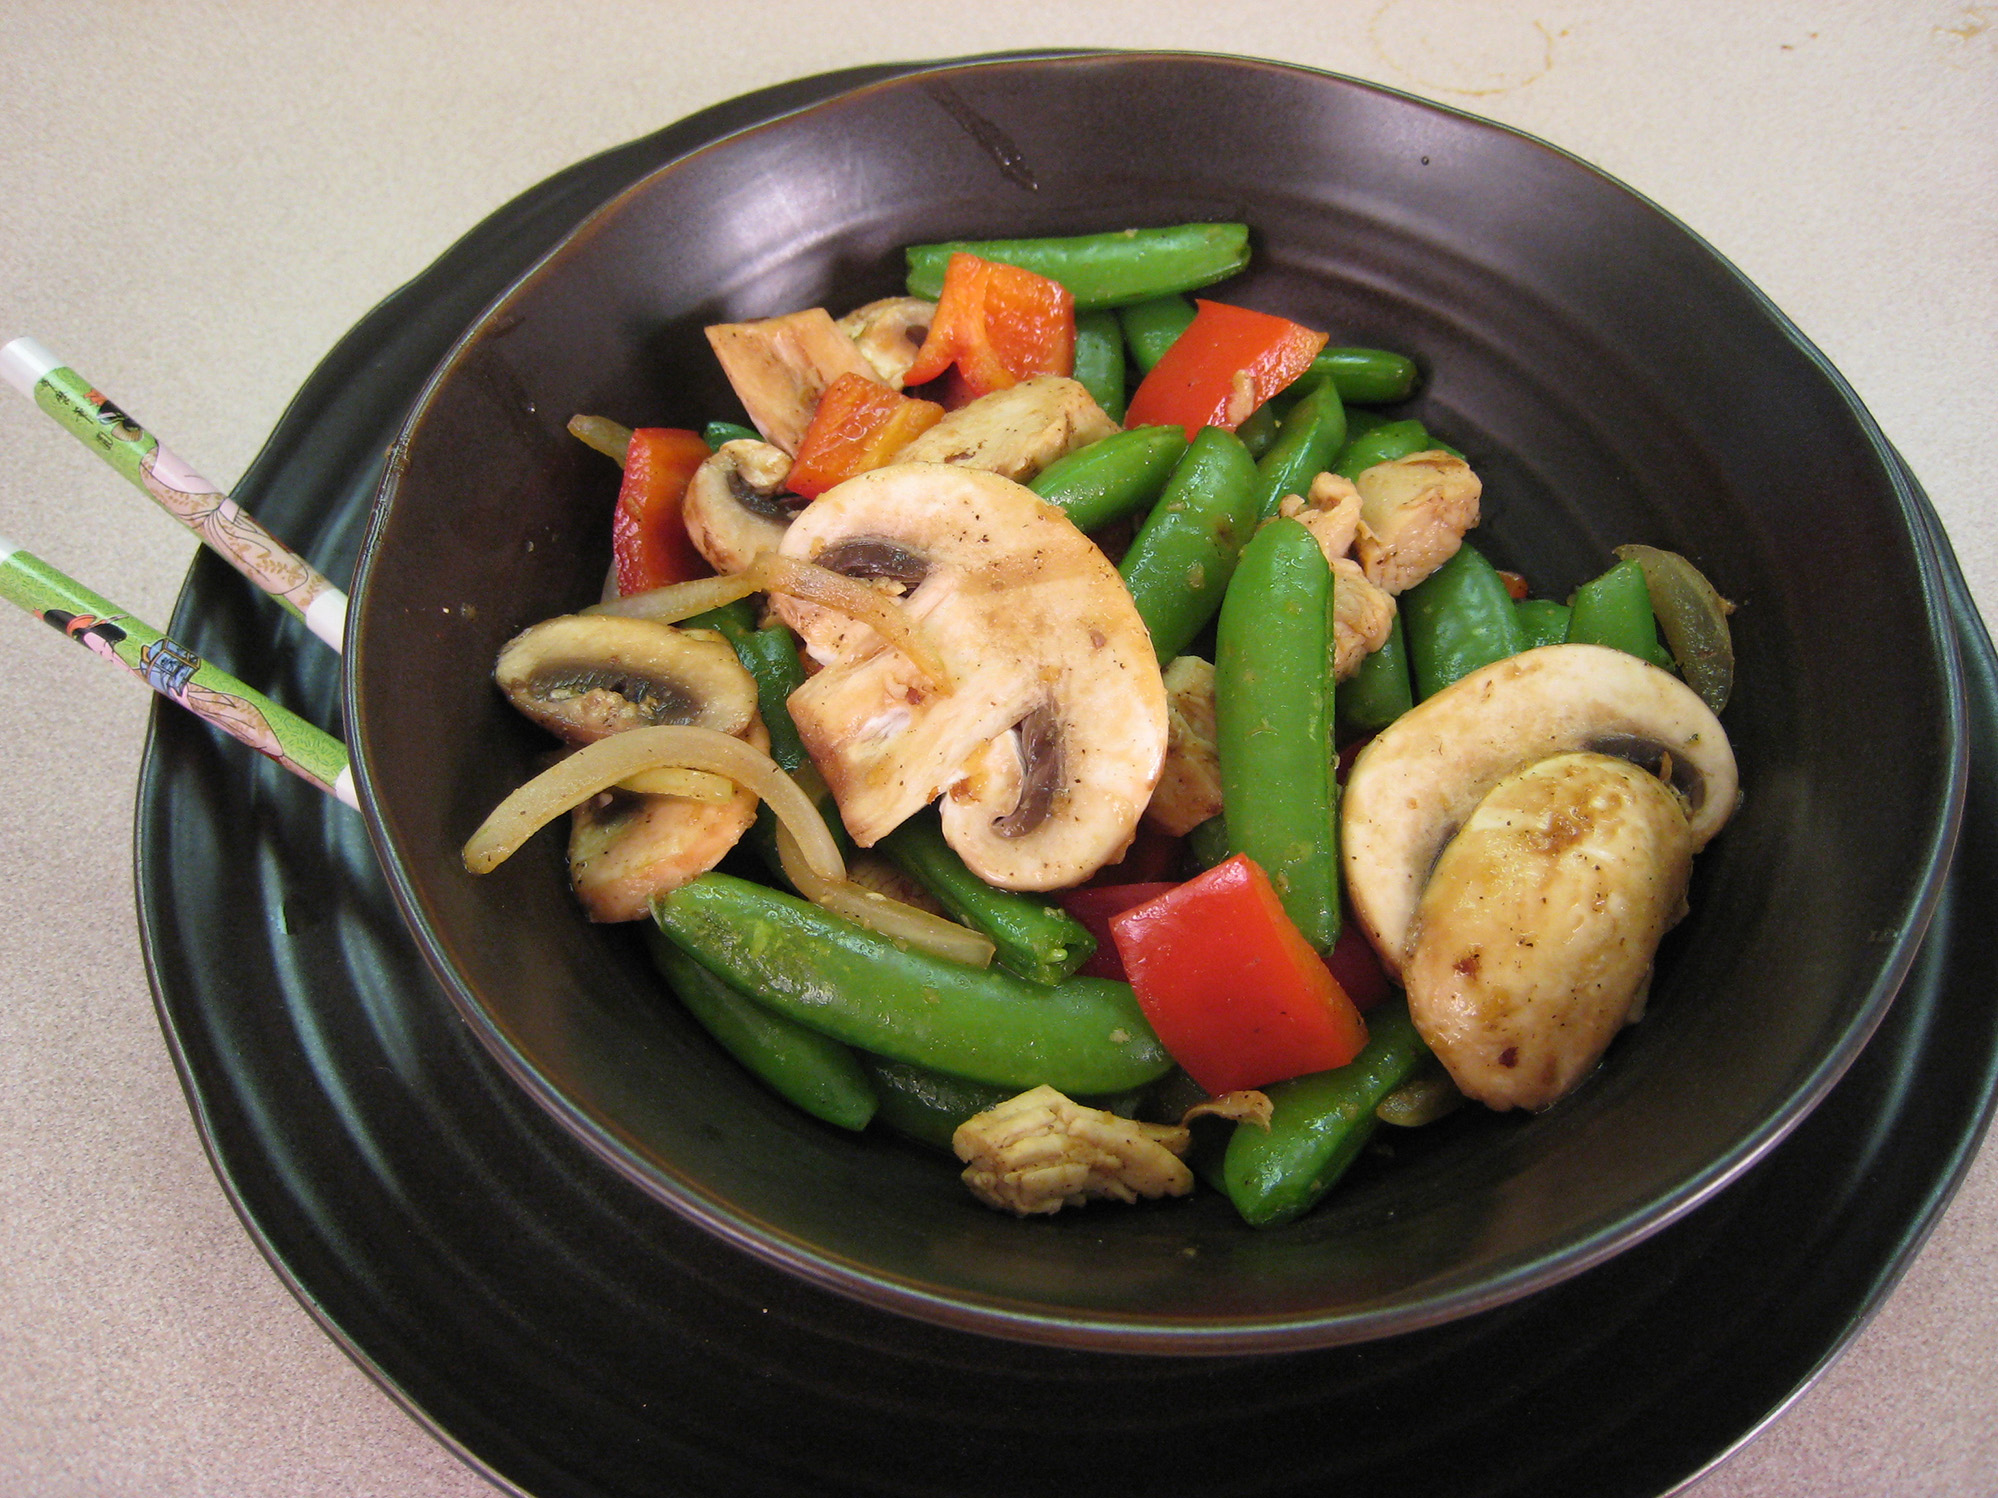 Stir-fry chicken and vegetables served in a bowl.